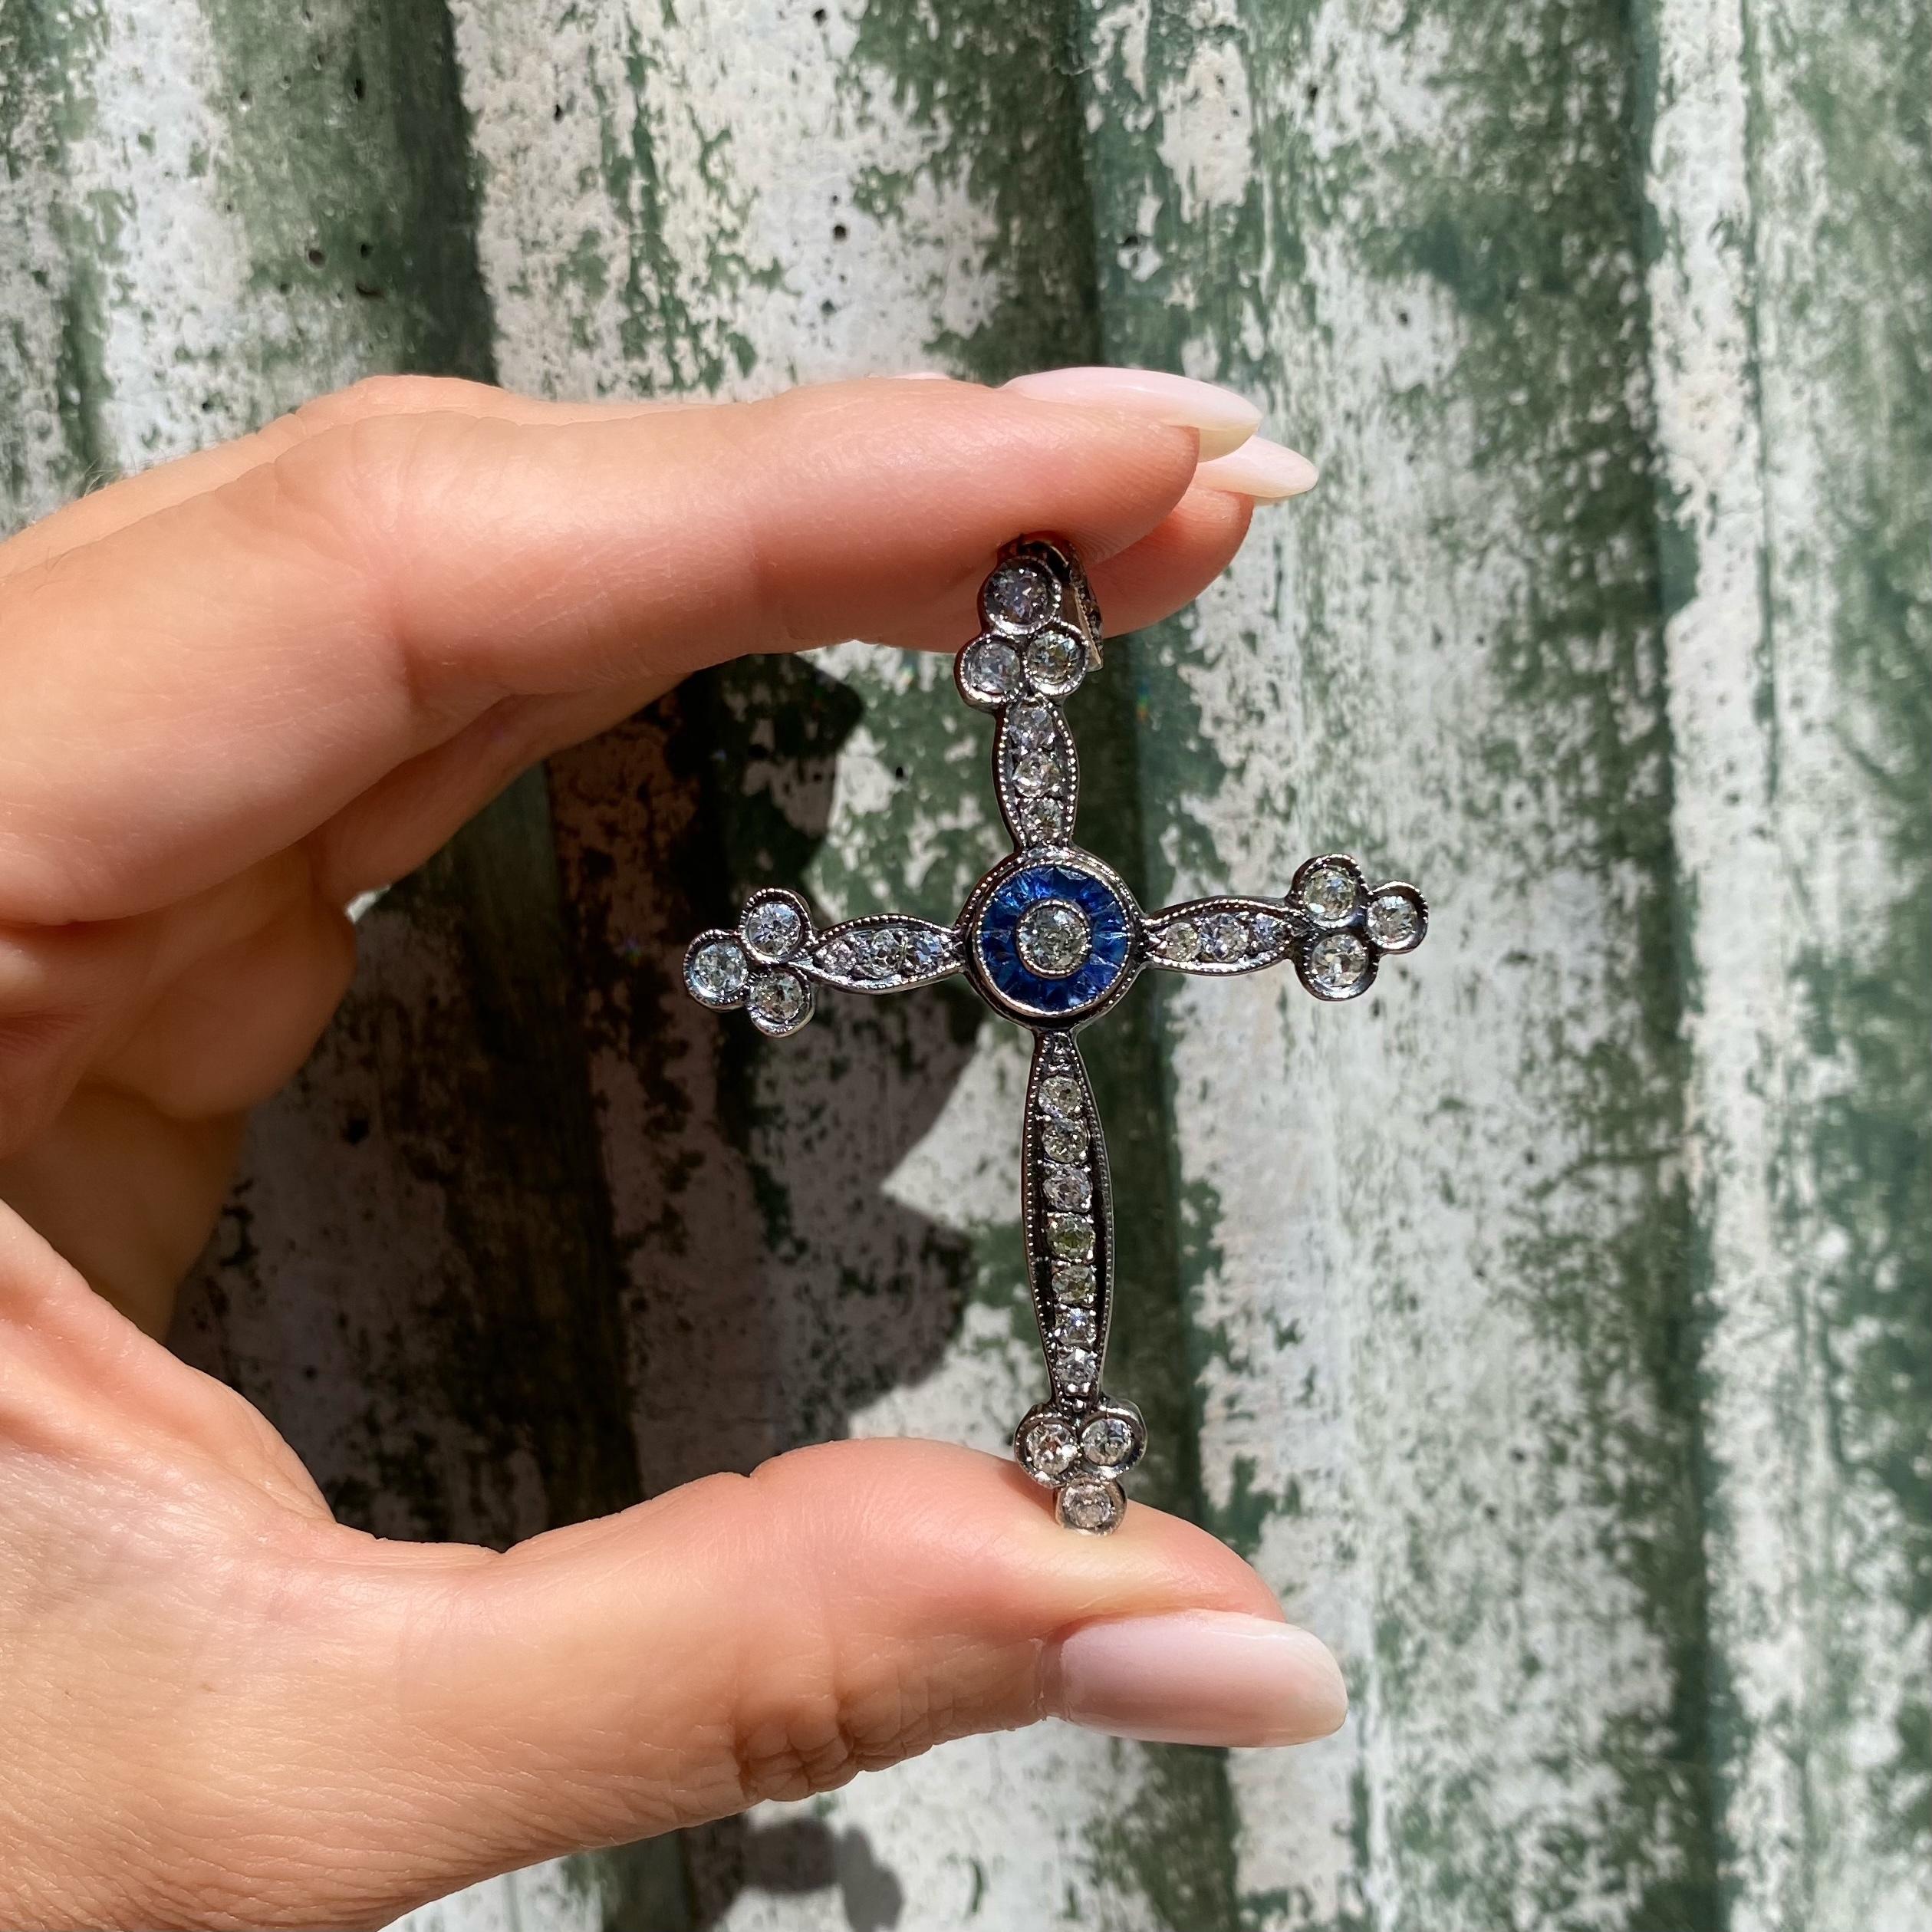 Beautiful Ornate and Finely detailed Antique Victorian Cross, Hand set with 32 old Mine and old European cut Diamonds, weighing approx. 3.15tcw with French cut Sapphires approx. 0.85tcw in center. Hand crafted in Silver on 9K Karat white Gold. The